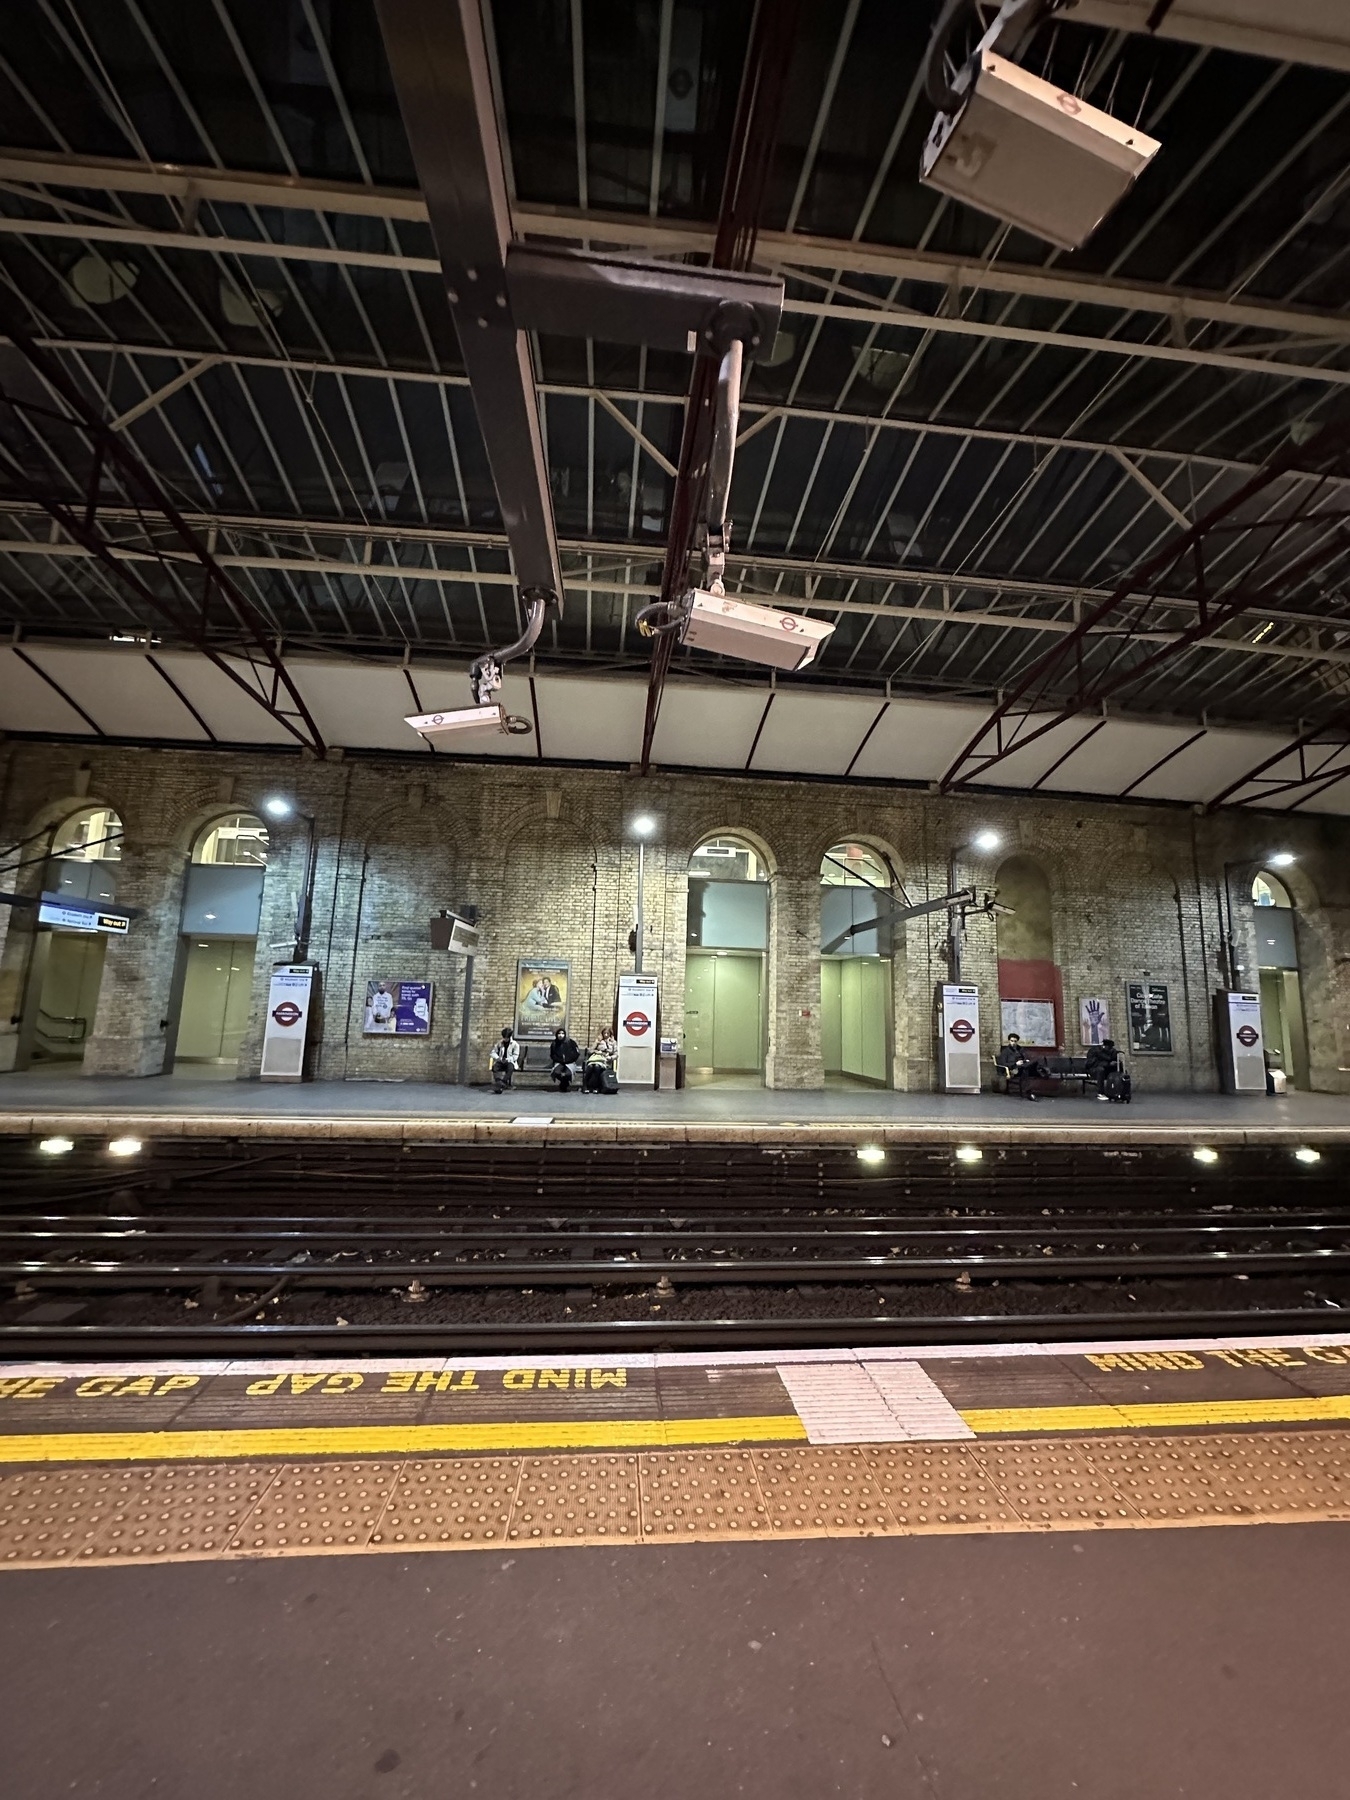 Underground station in London with several CCTV cameras in foreground